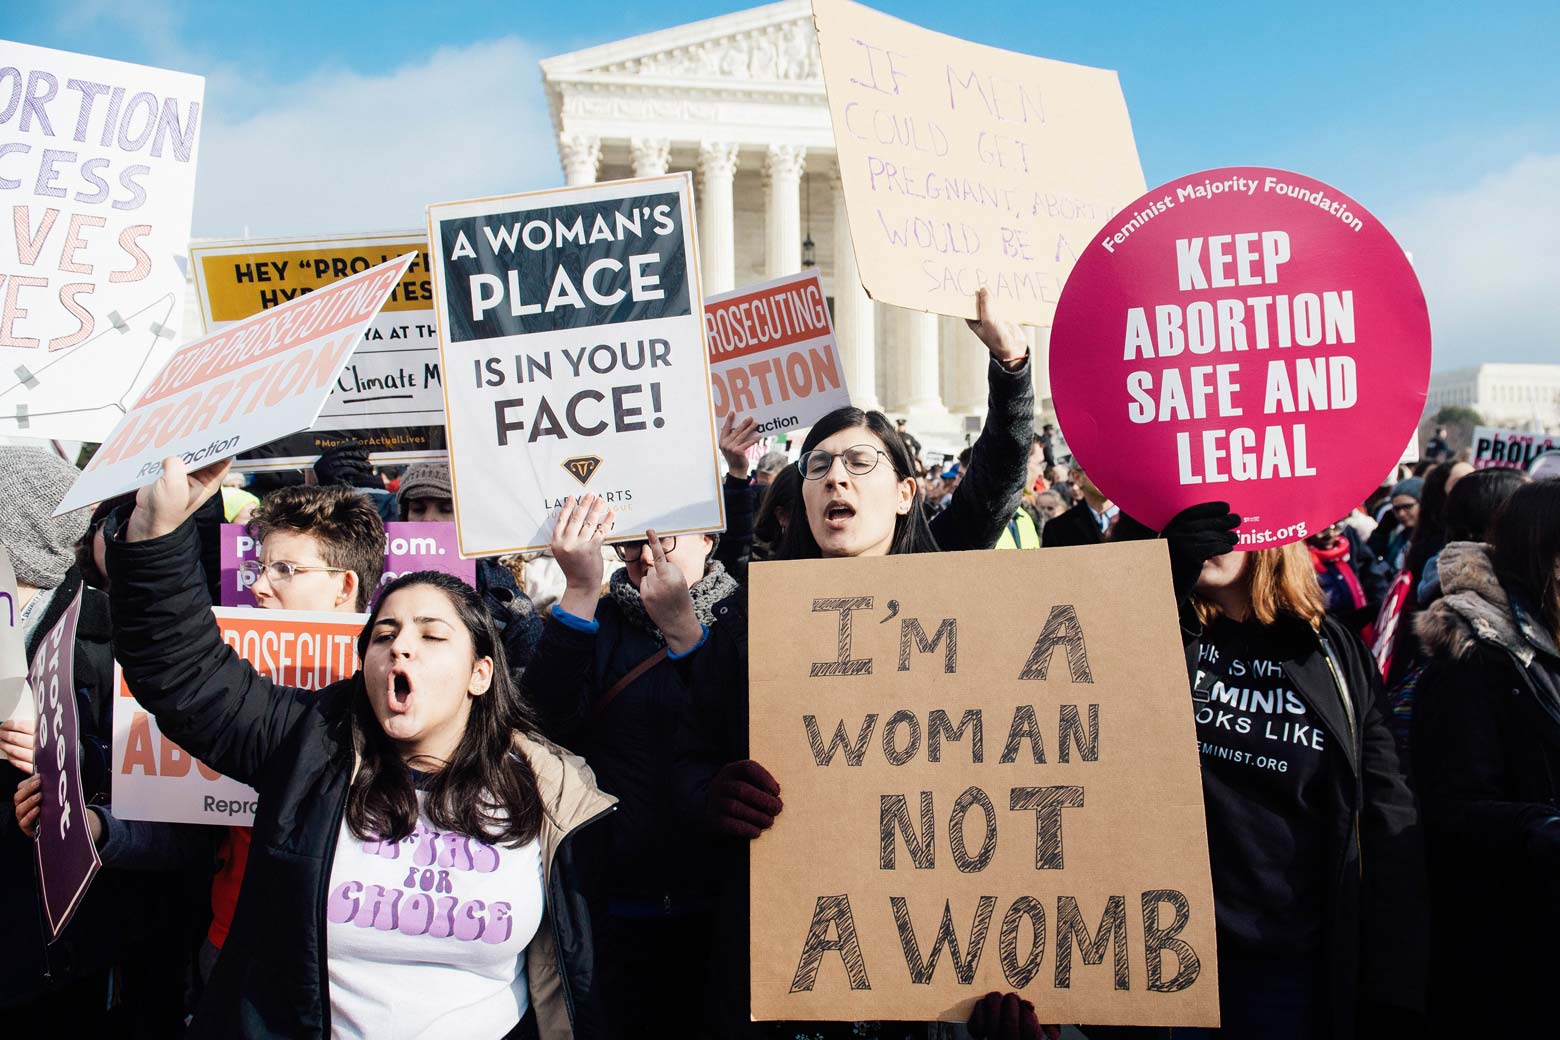 Pro-choice activists hold signs in response to anti-abortion activists participating in the March for Life outside the Supreme Court.